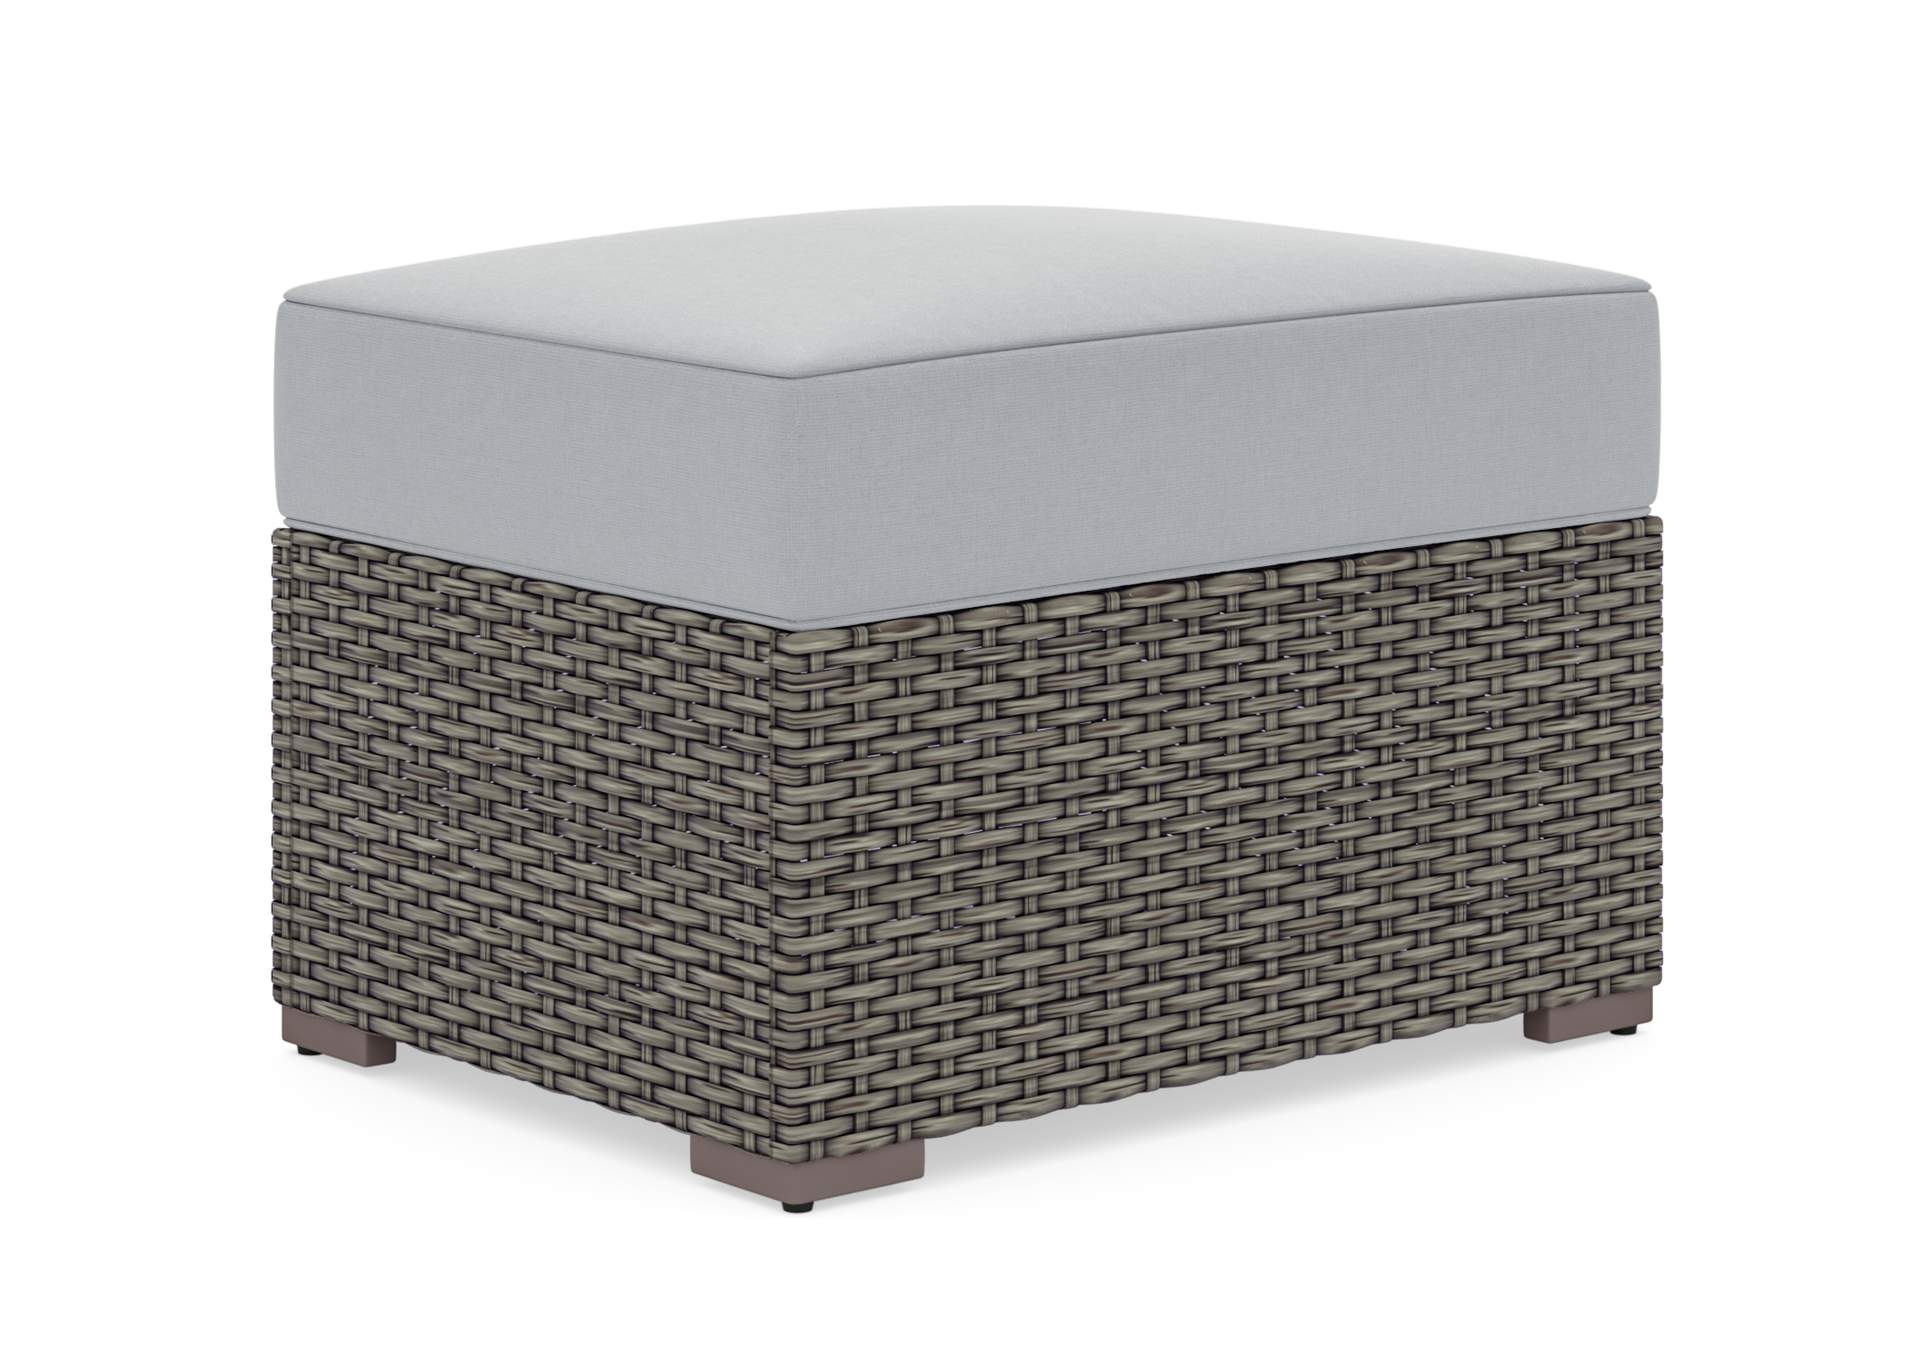 Boca Raton Outdoor Ottoman By Homestyles,Homestyles